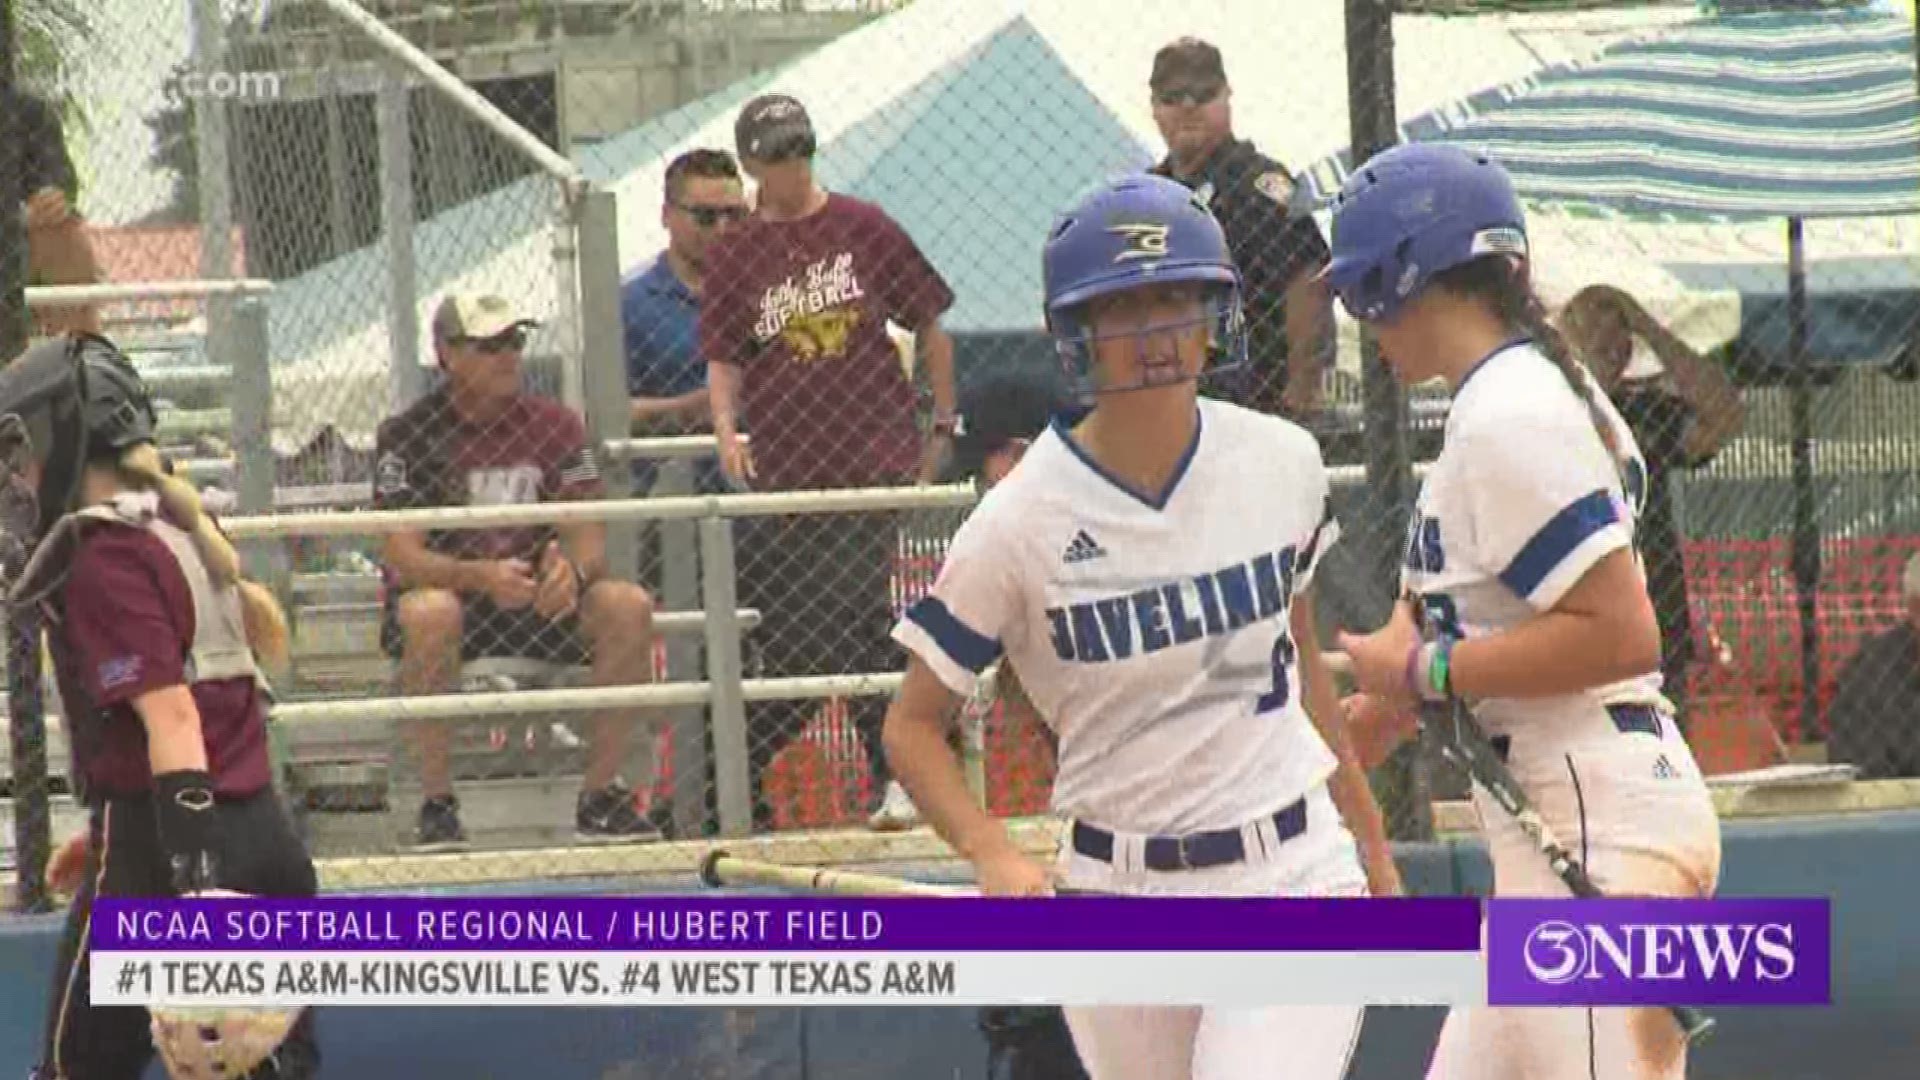 Texas A&M-Kingsville tops West Texas A&M 8-3 to advance to Region Final.